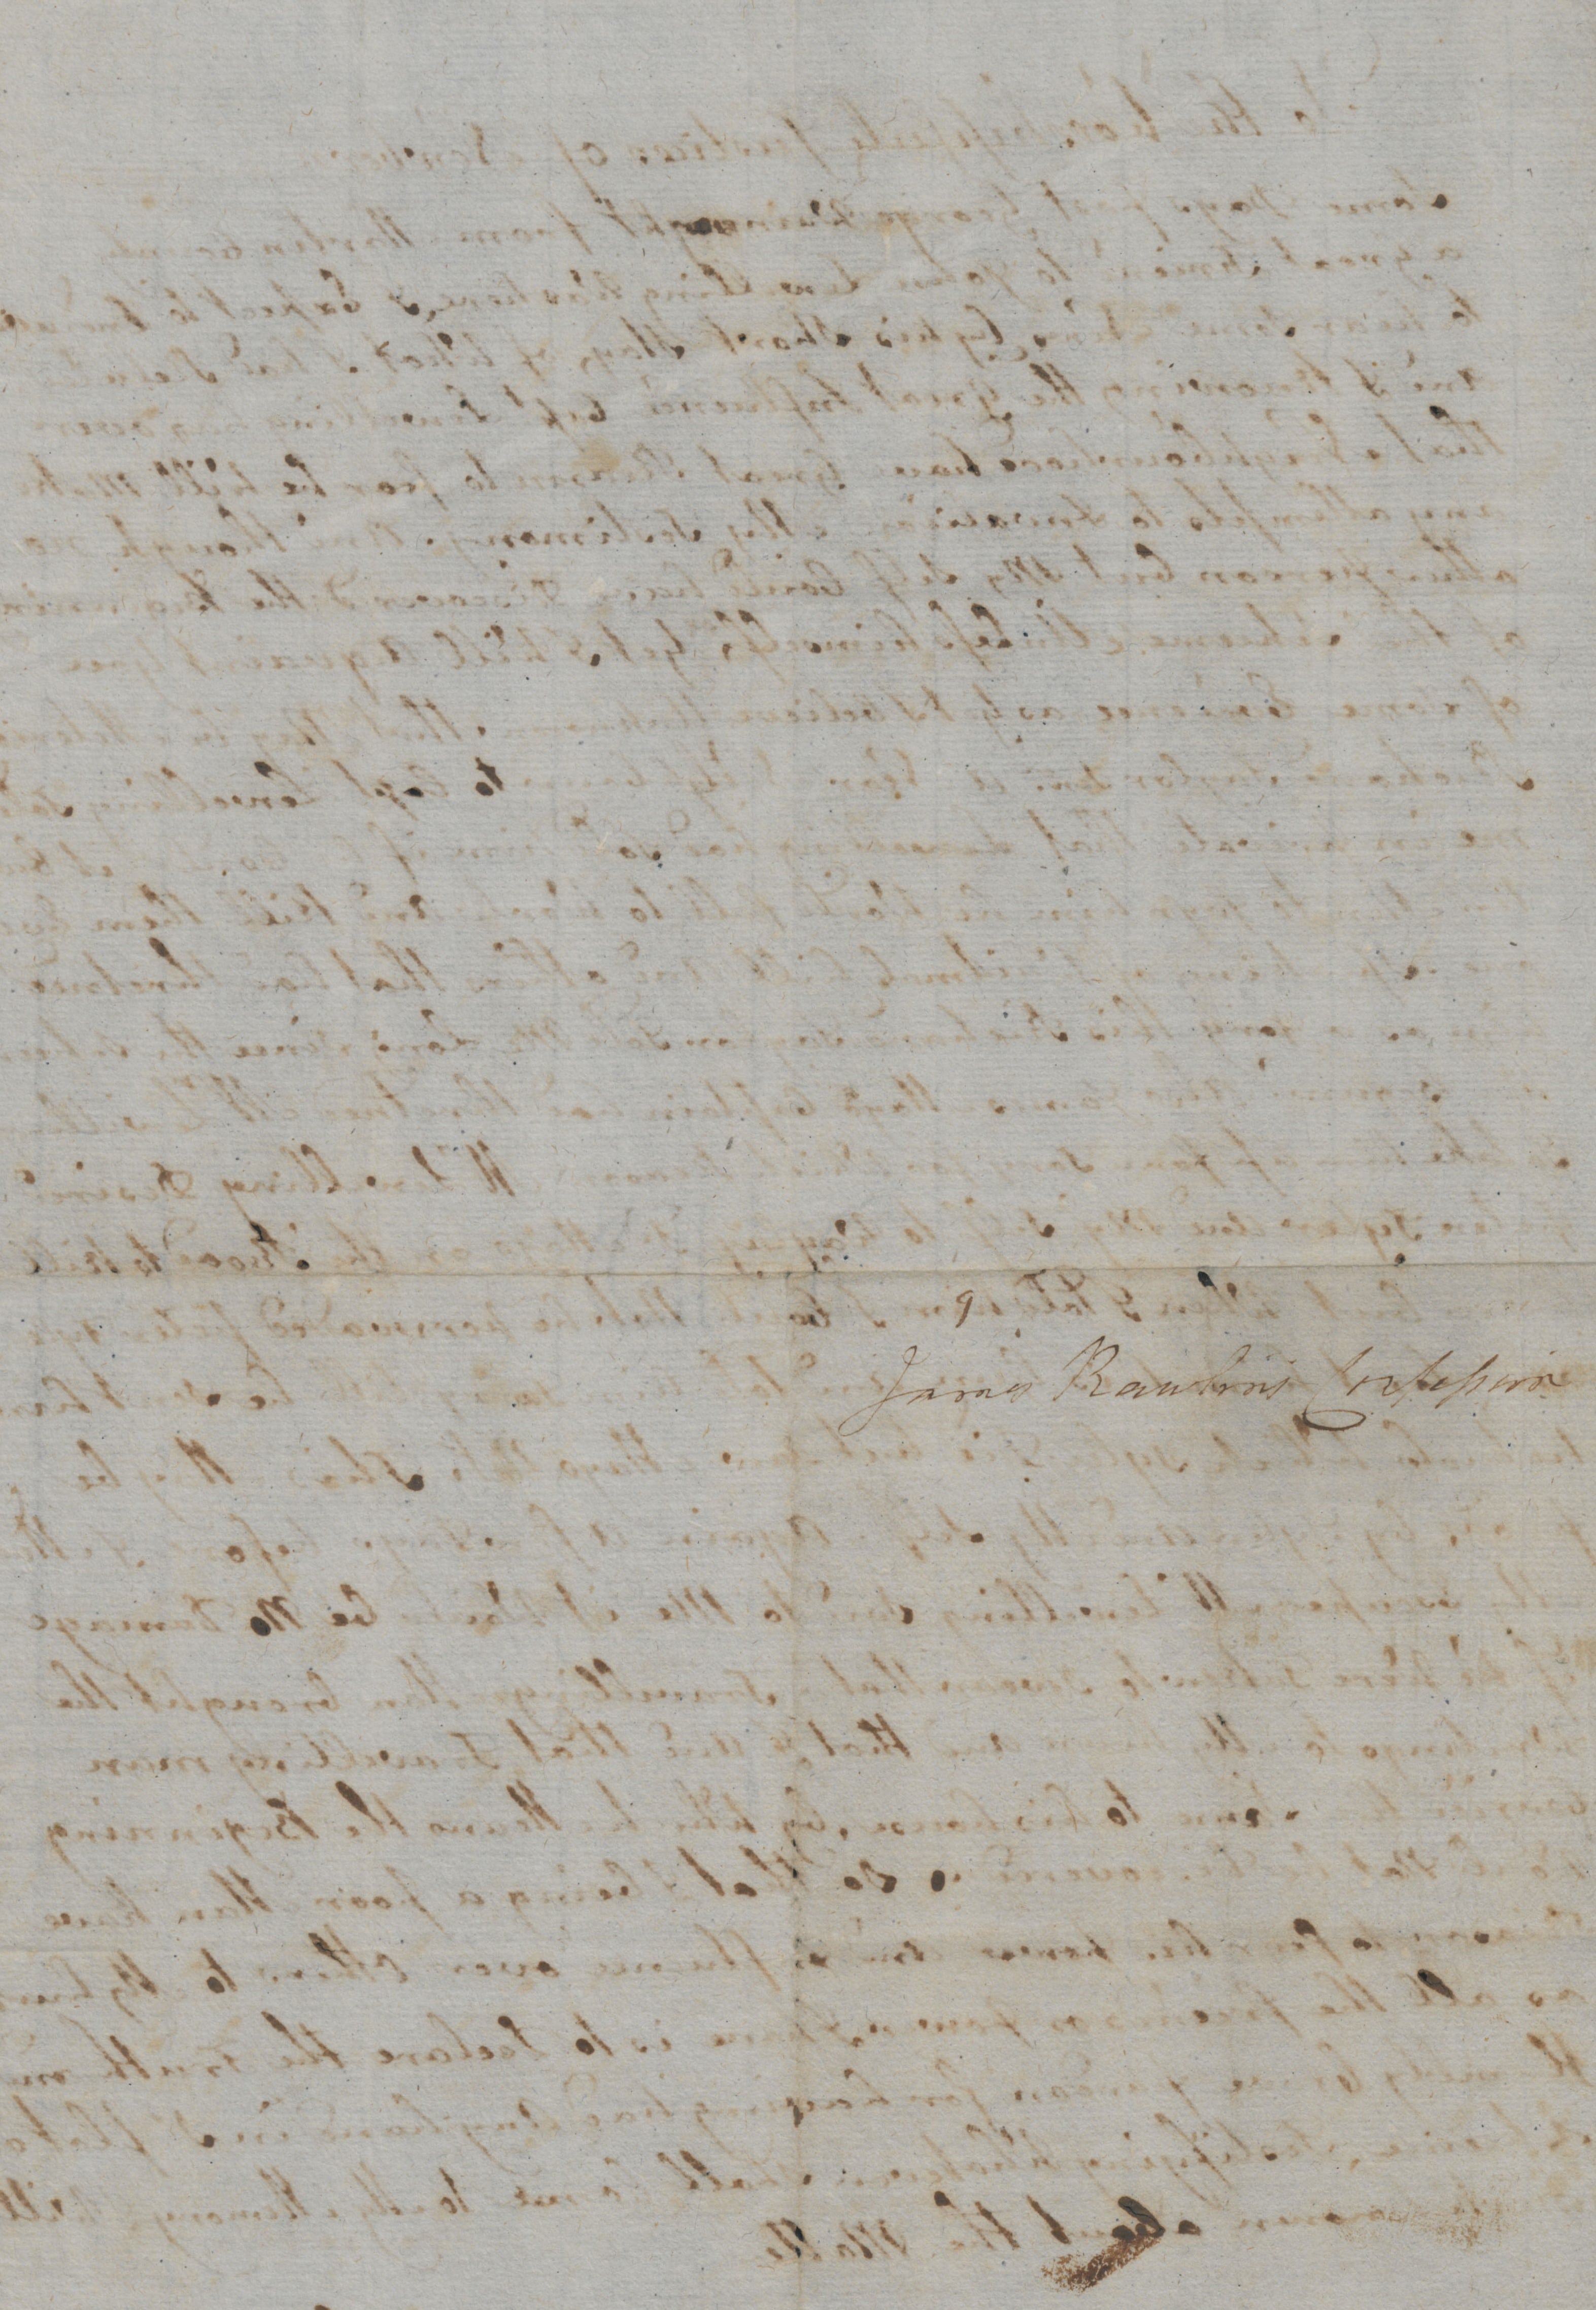 Letter from James Rawlings to the Worshipful Justices of Newbern, circa September 1777, page 2